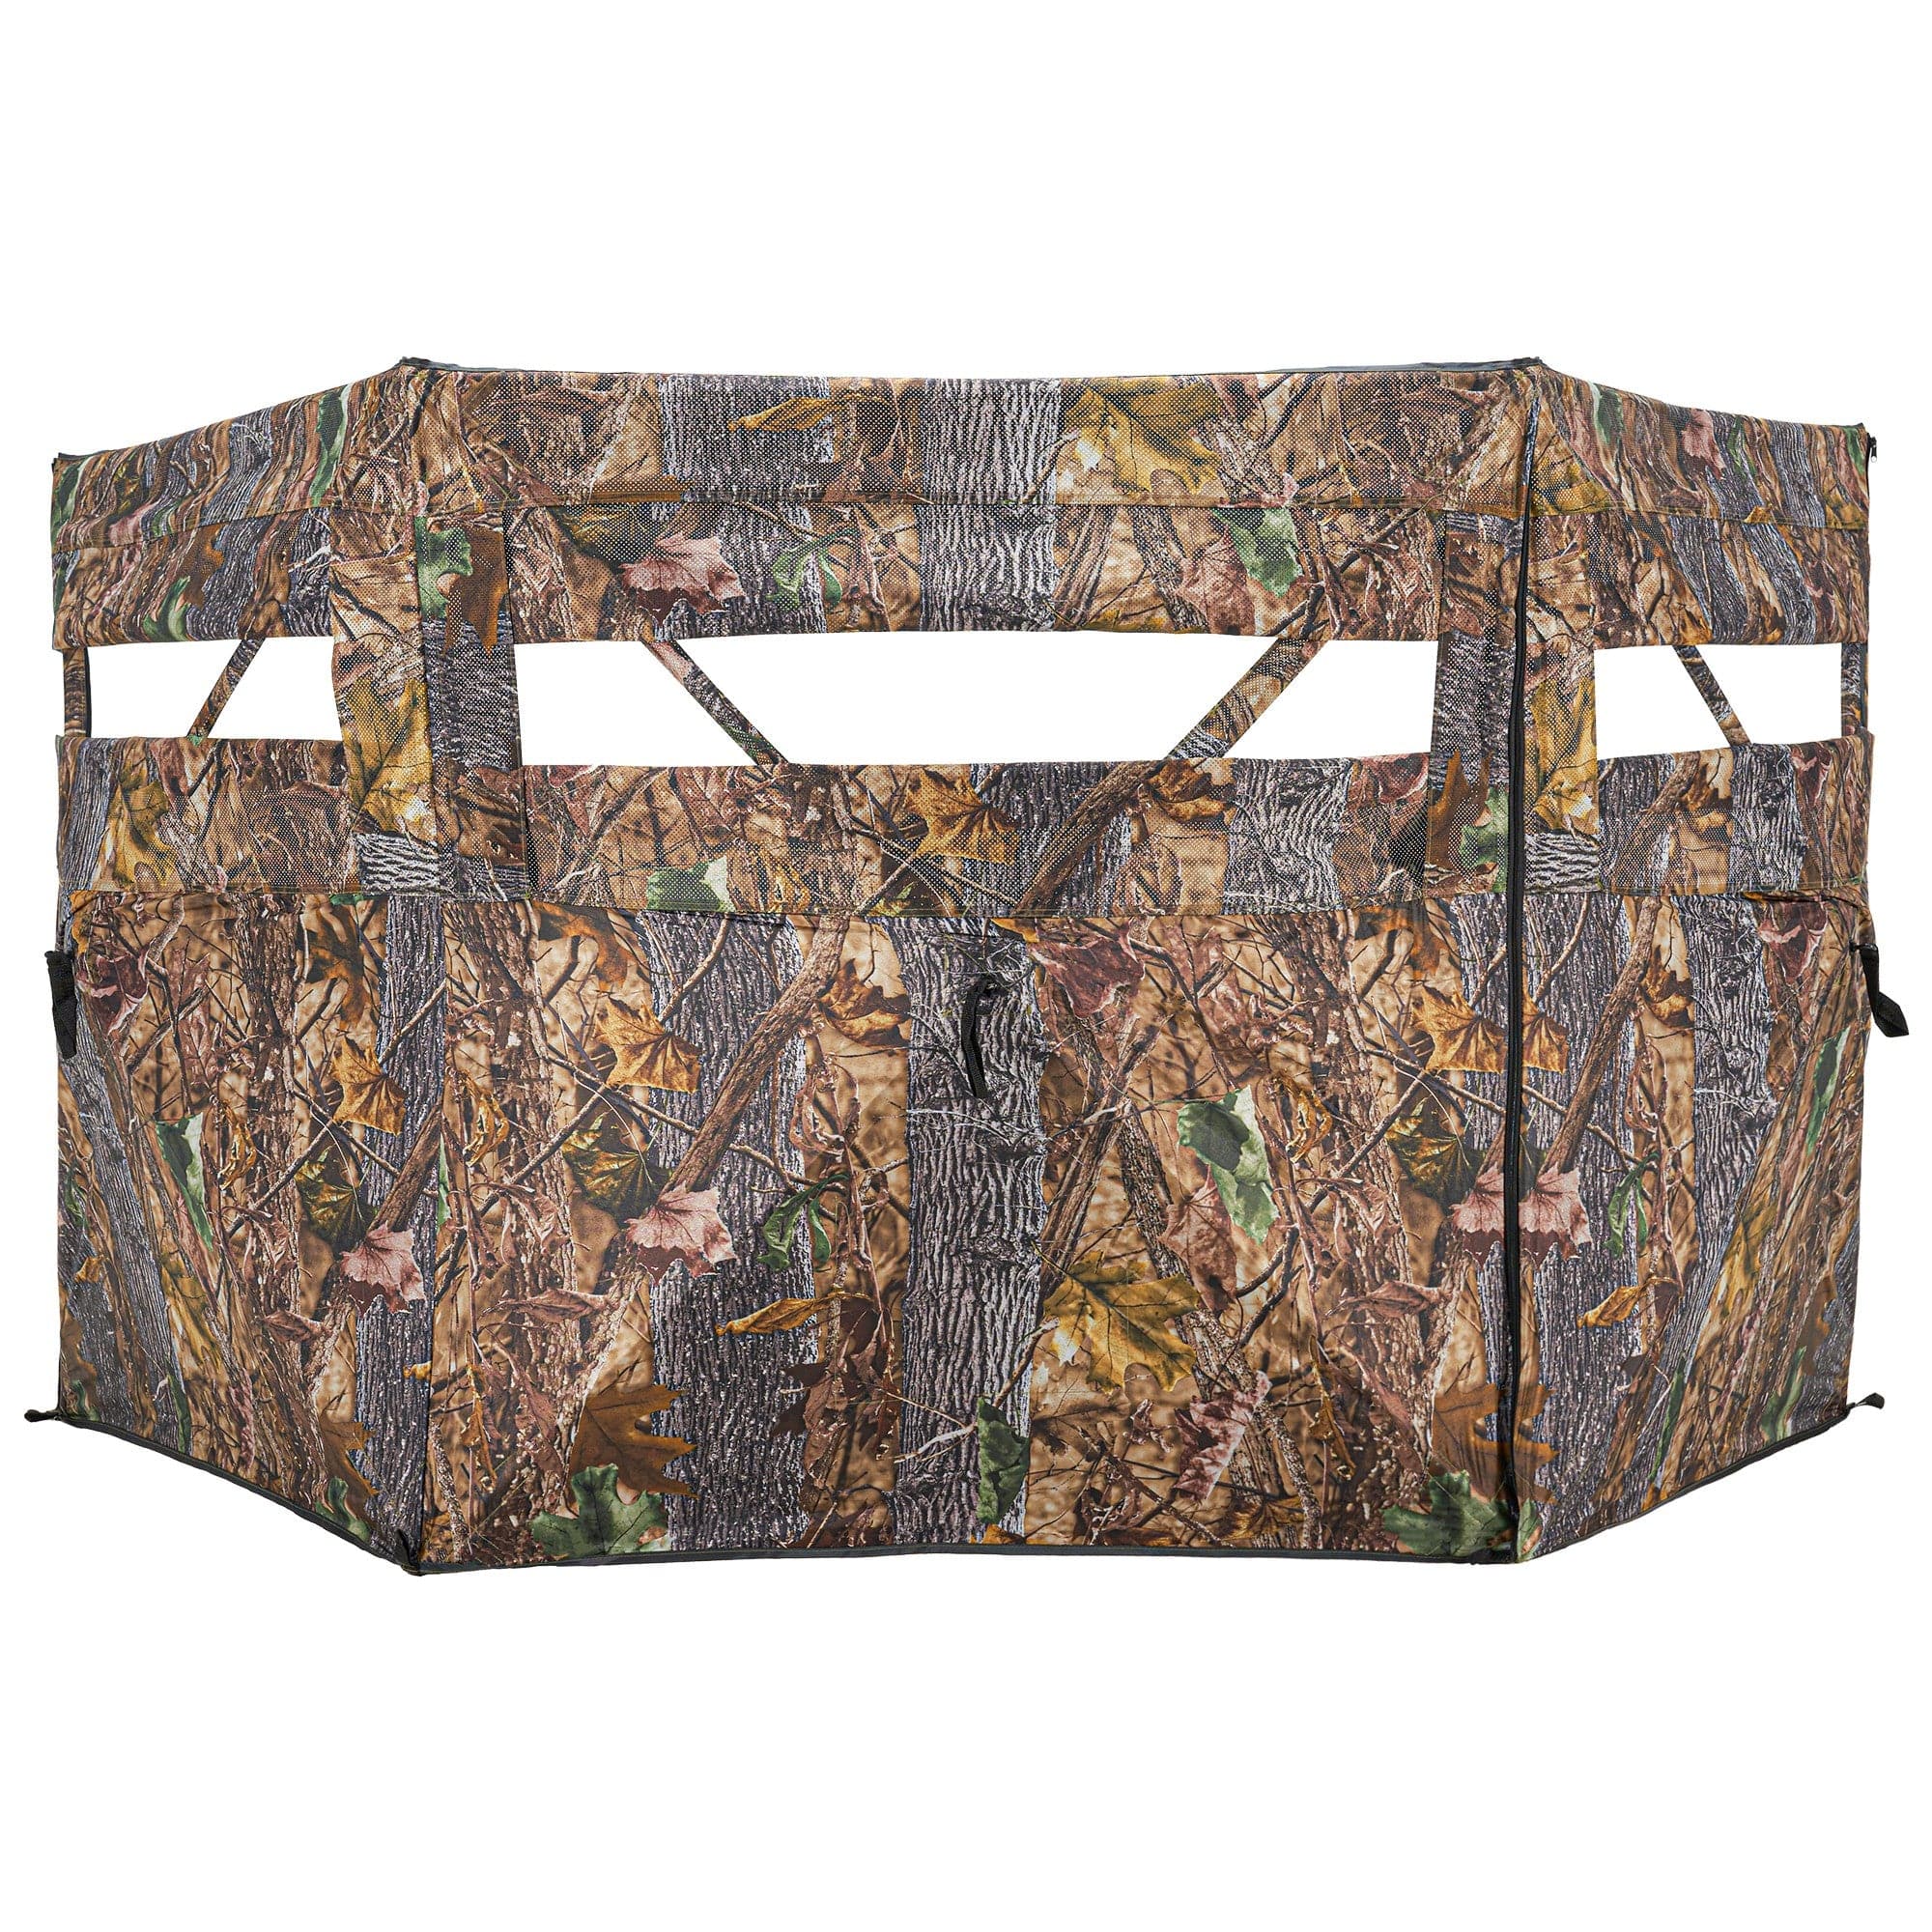 RPNB HGB-5 Hunting Blind Armadillo Safe and Vault